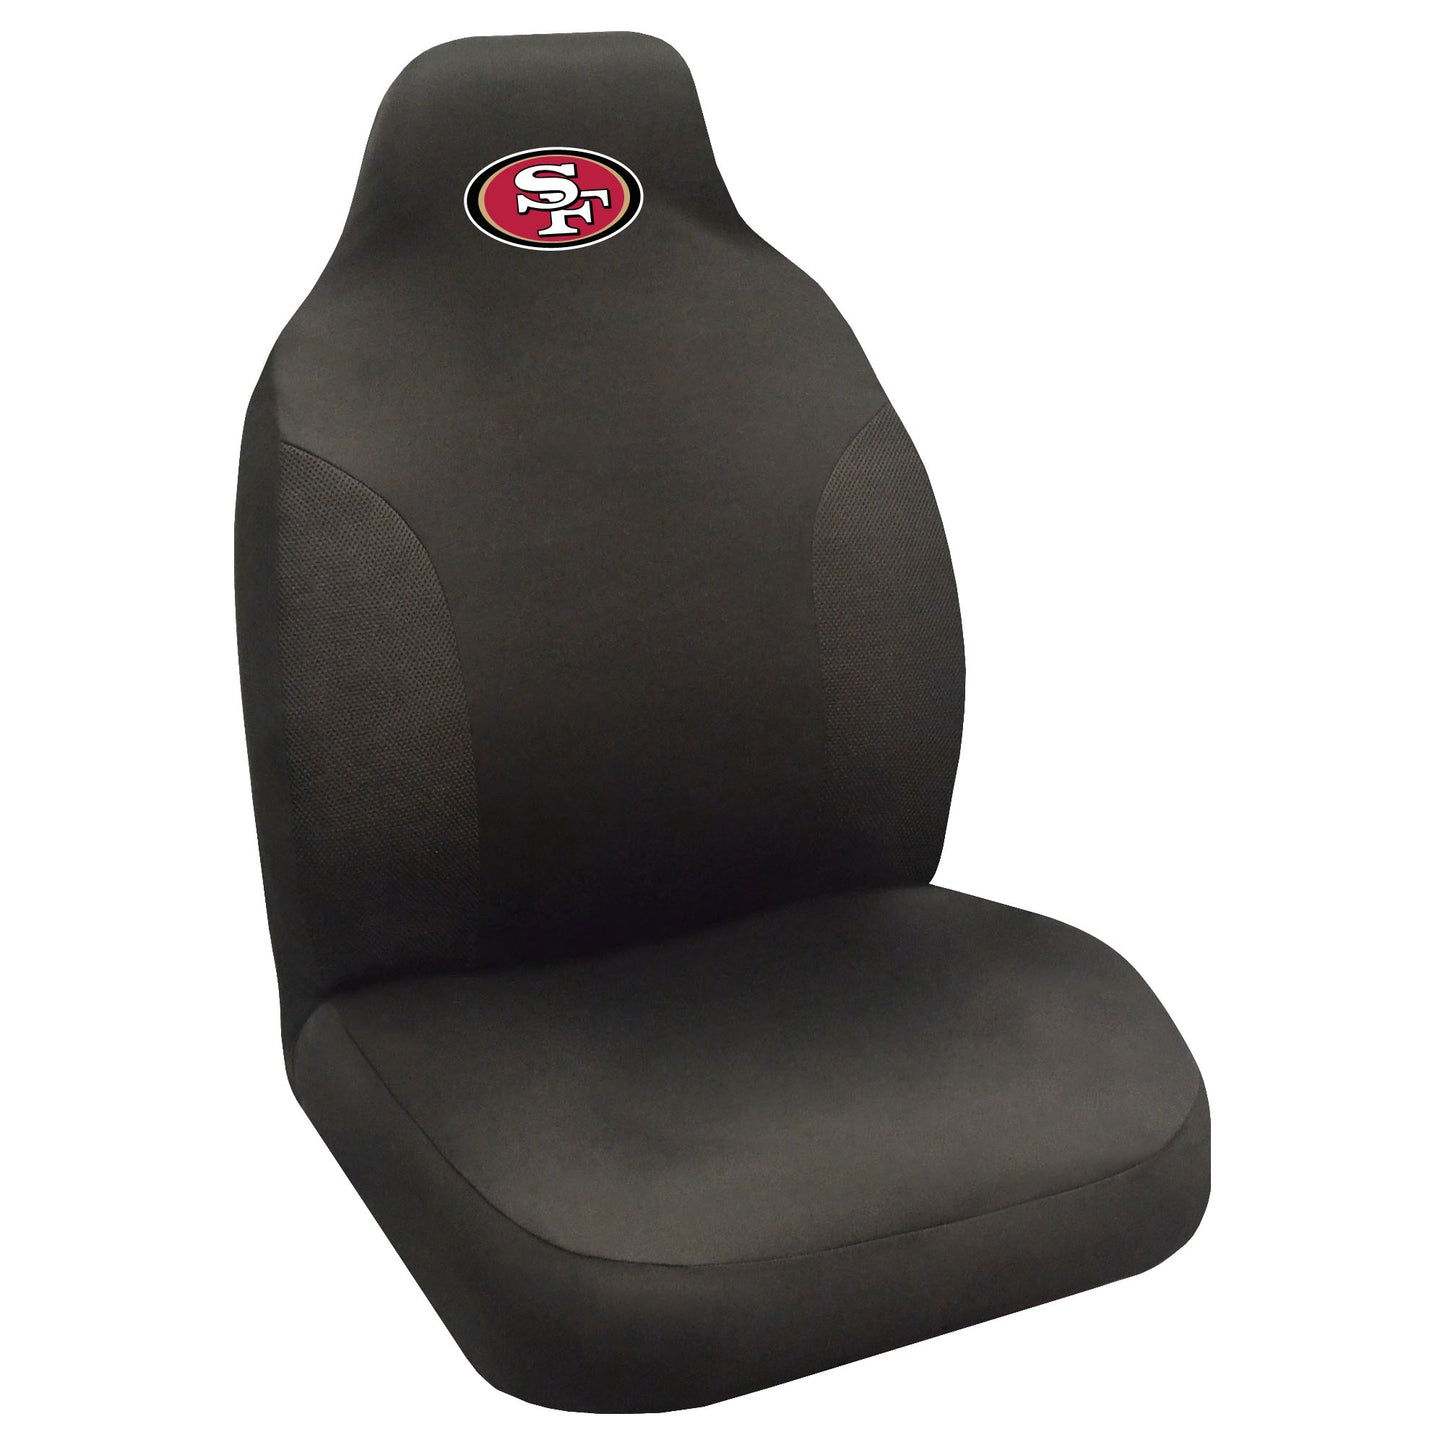 San Francisco 49ers Embroidered Seat Cover